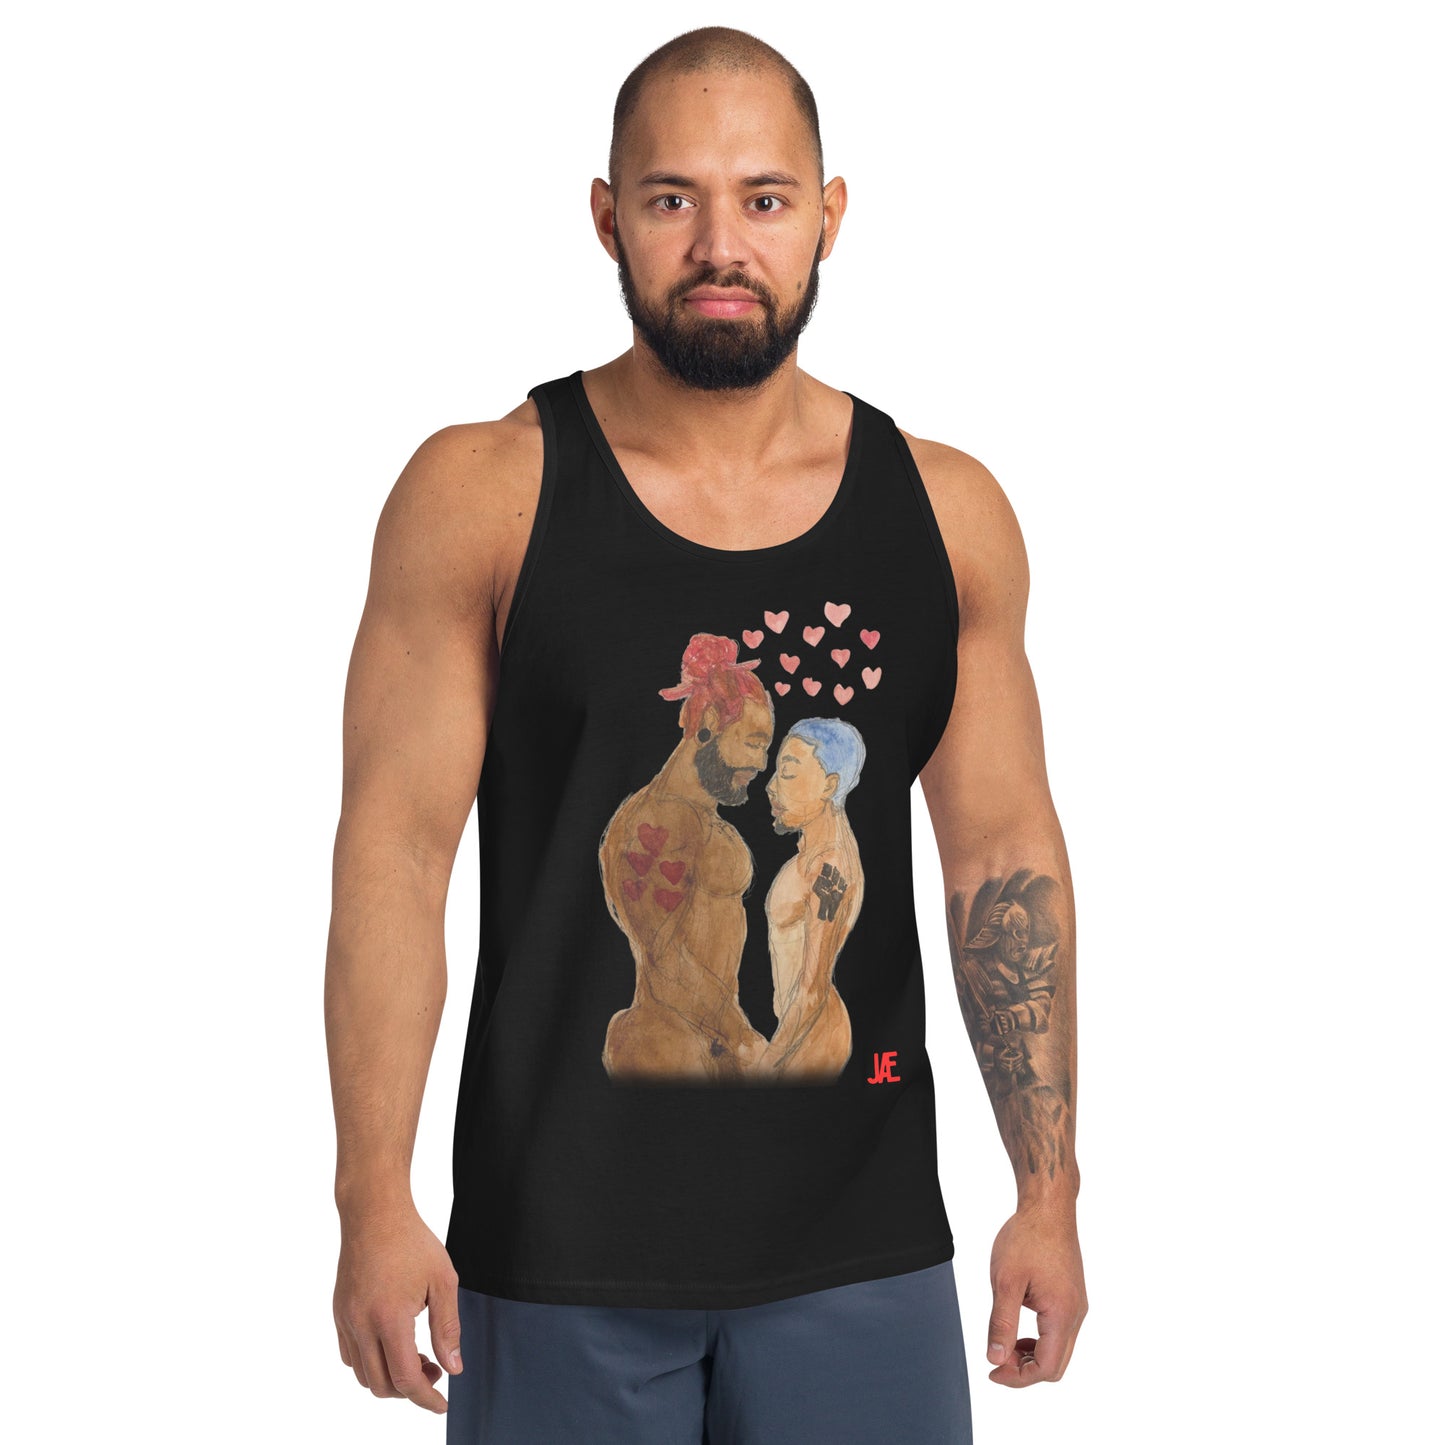 Lovers In Paradise Unisex Tank Top (XS-2XL)